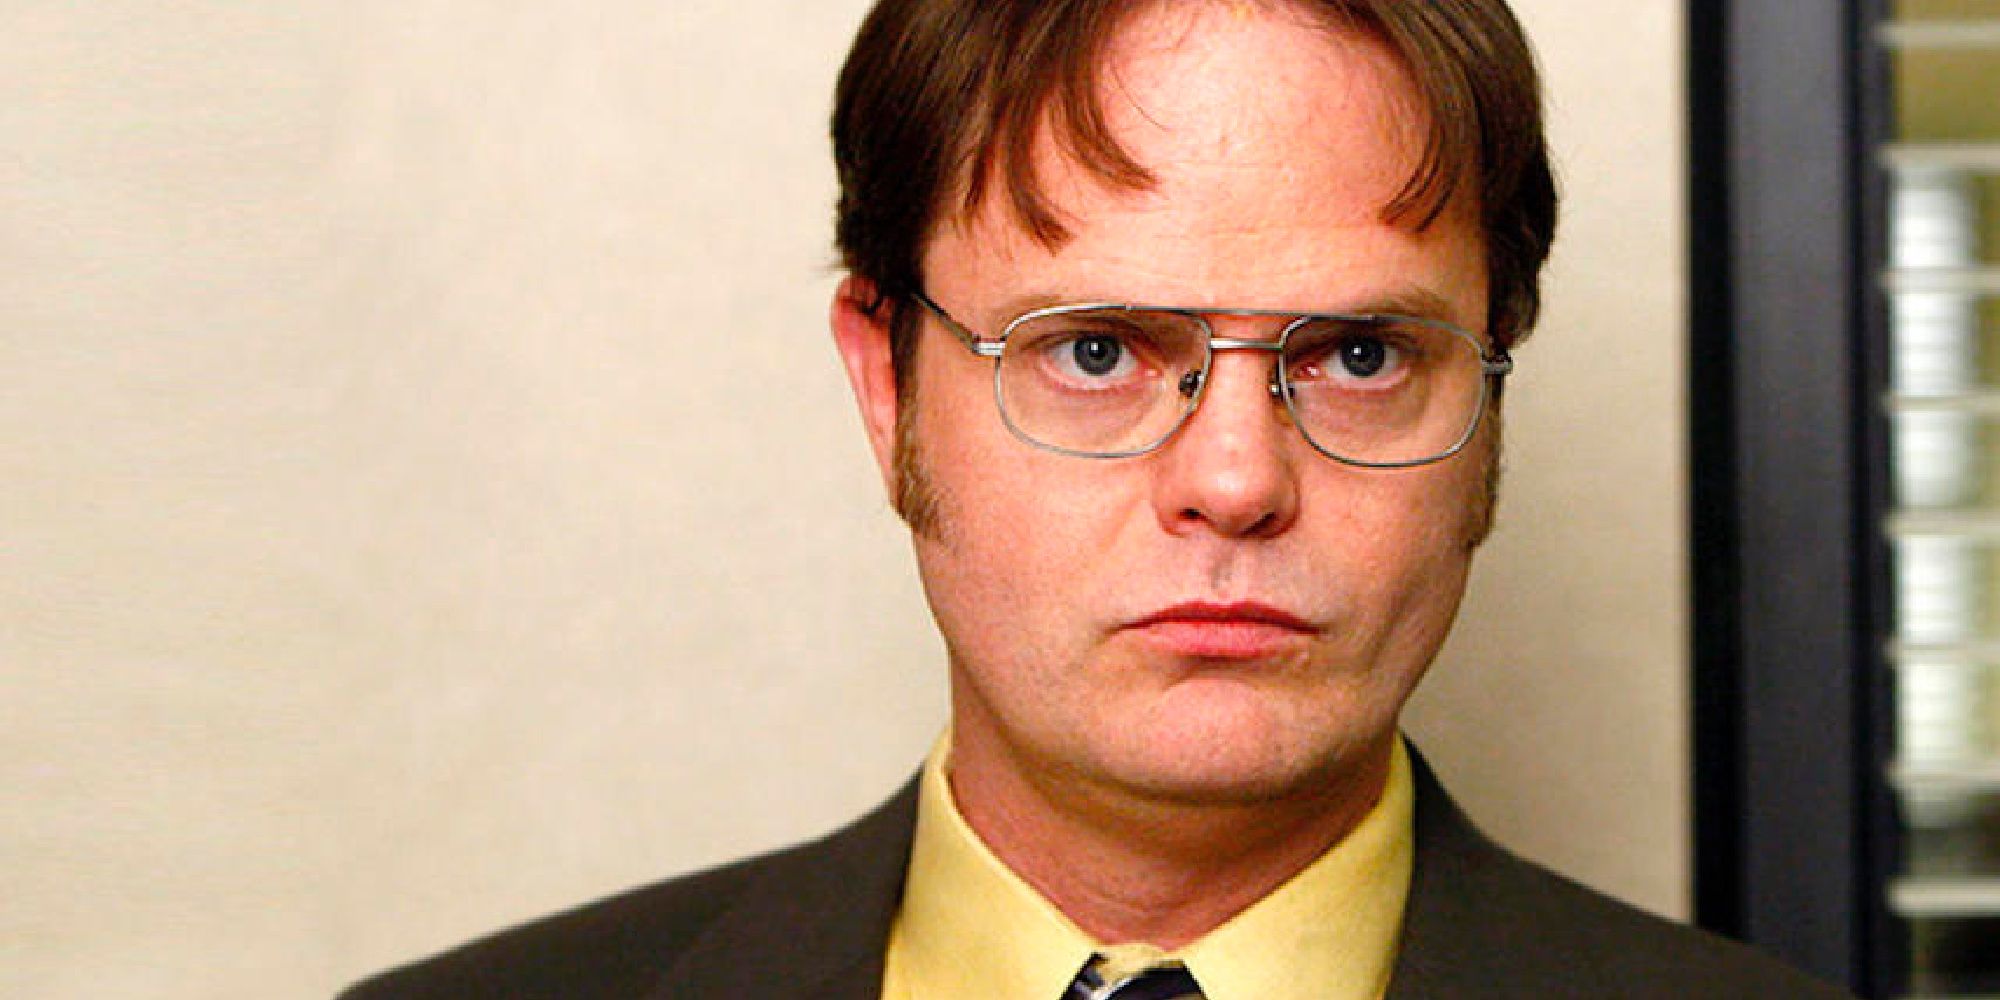 Dwight Shrute in the confessional on The Office